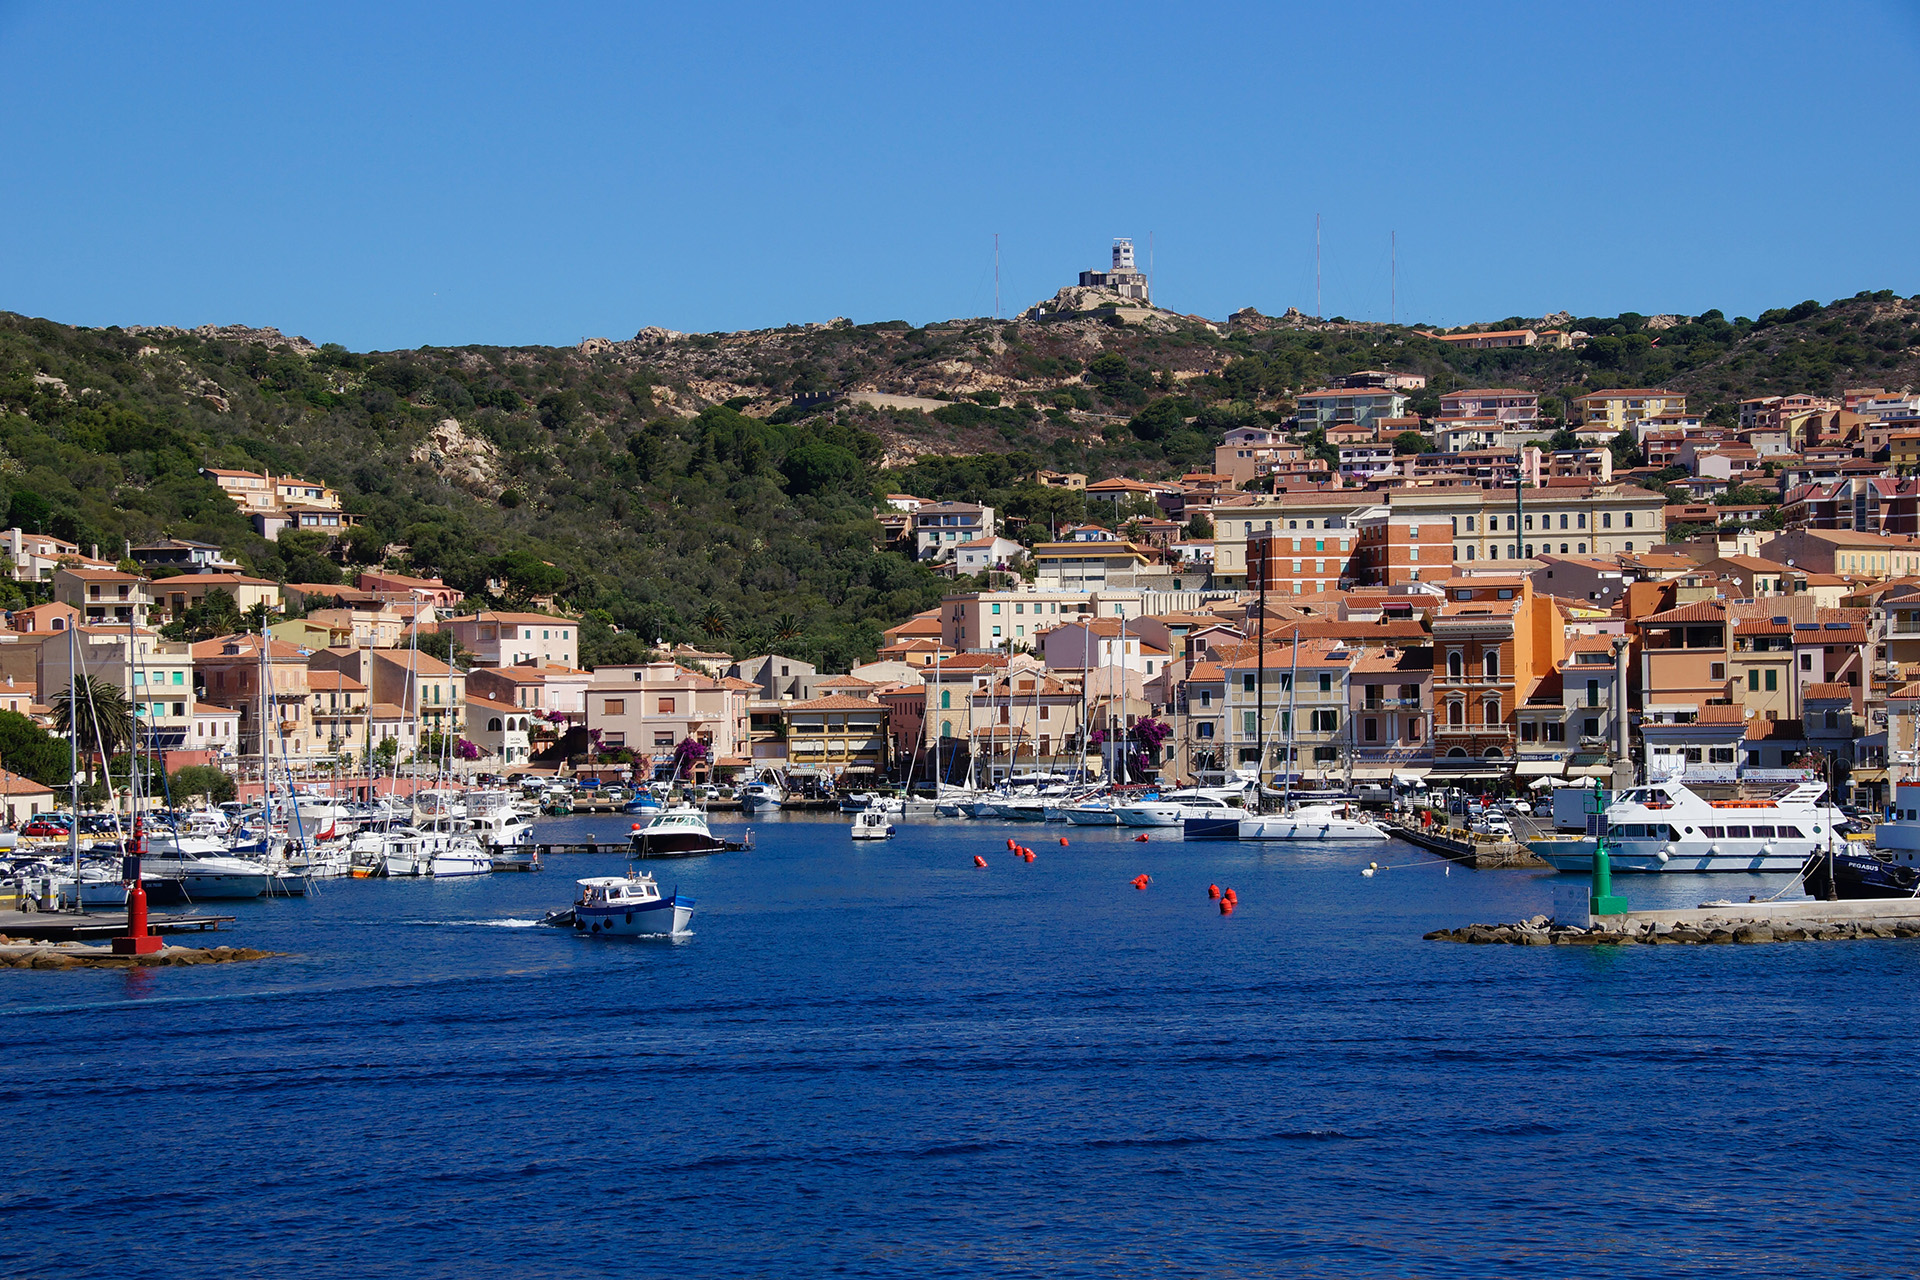 View of the main town of La Maddalena from the water, Italy